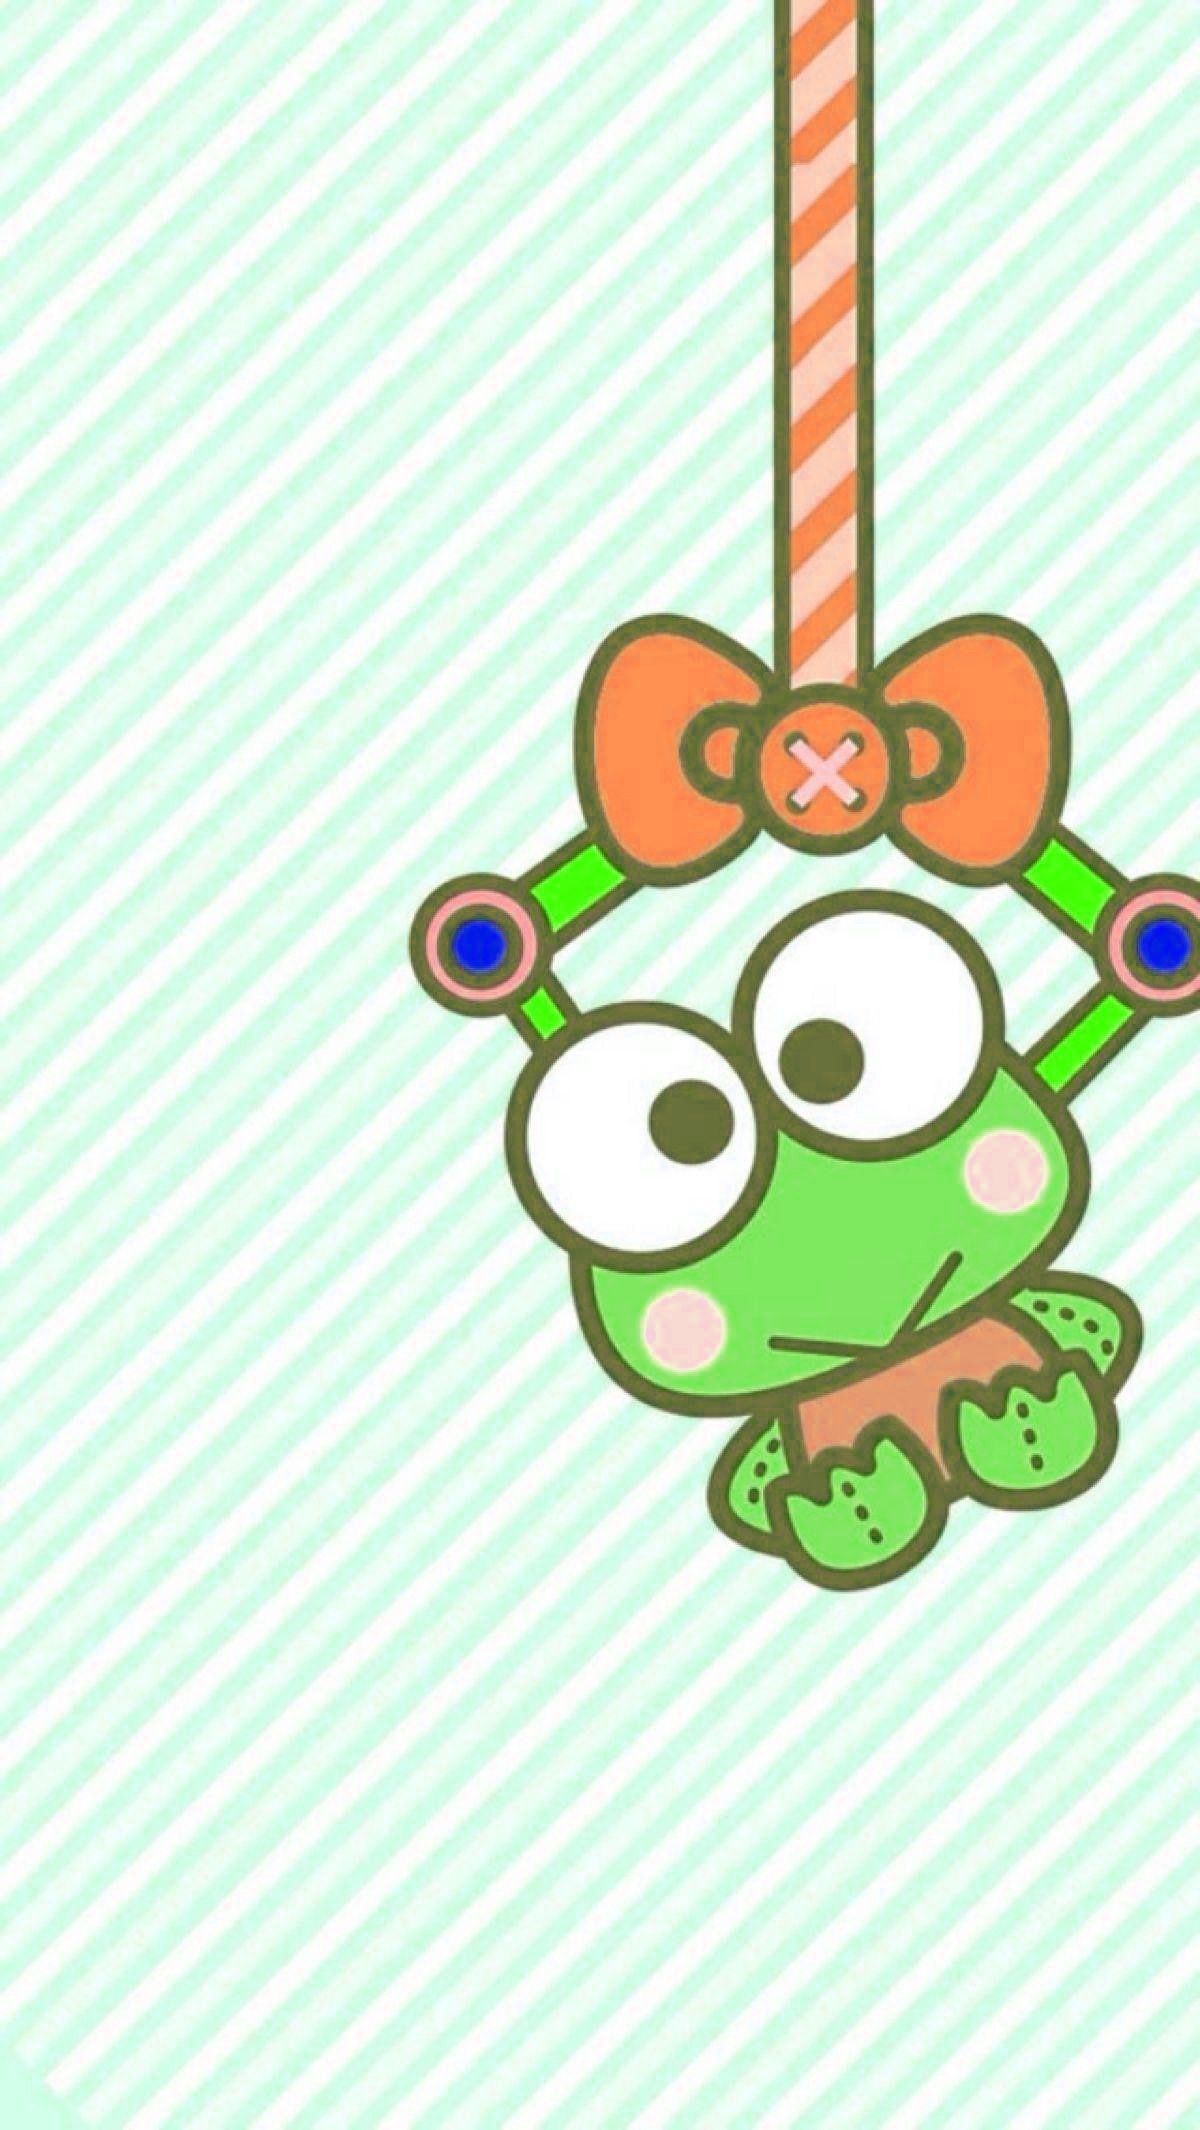 Keroppi, the cute green frog from Sanrio, hanging from a ribbon. - Keroppi